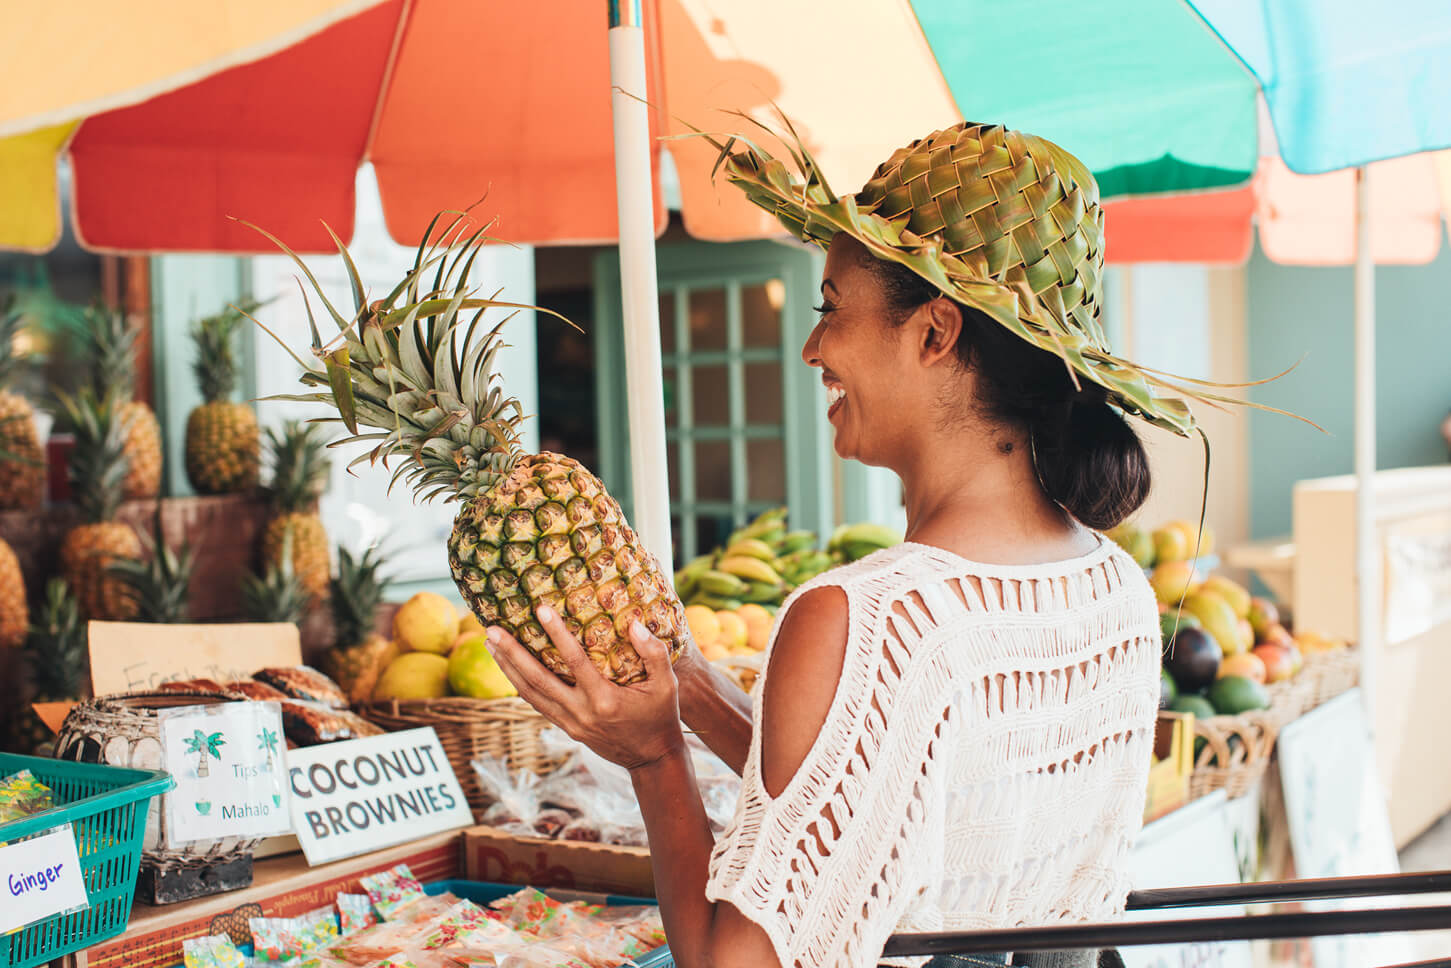 Find out the best farmers markets in Kauai by top Hawaii blog Hawaii Travel with Kids. Image of a woman holding up a pineapple at a Kauai farmers market.